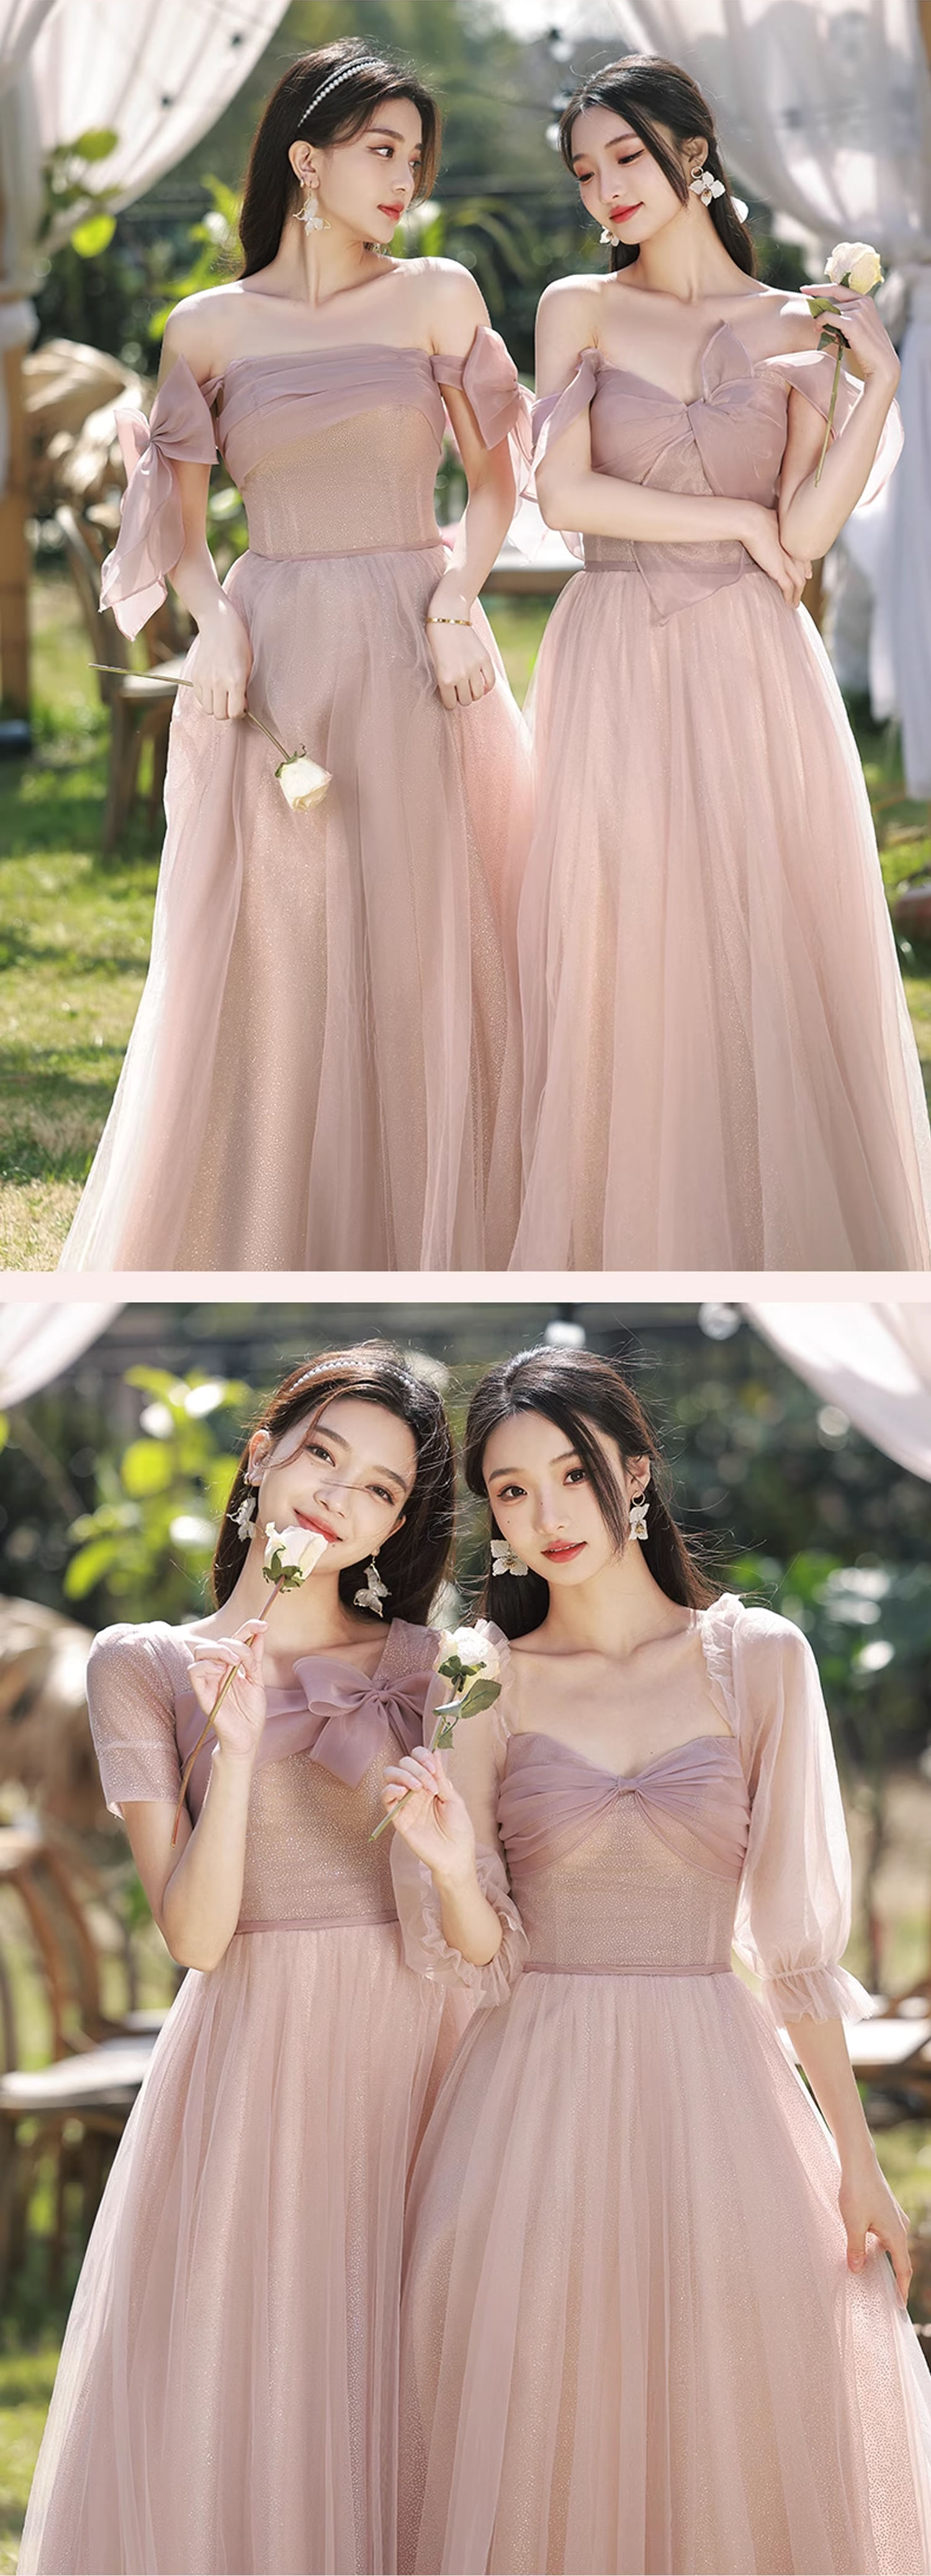 Elegant-Pink-Tulle-Slim-Fit-Bridesmaid-Wedding-Guest-Party-Maxi-Dress16